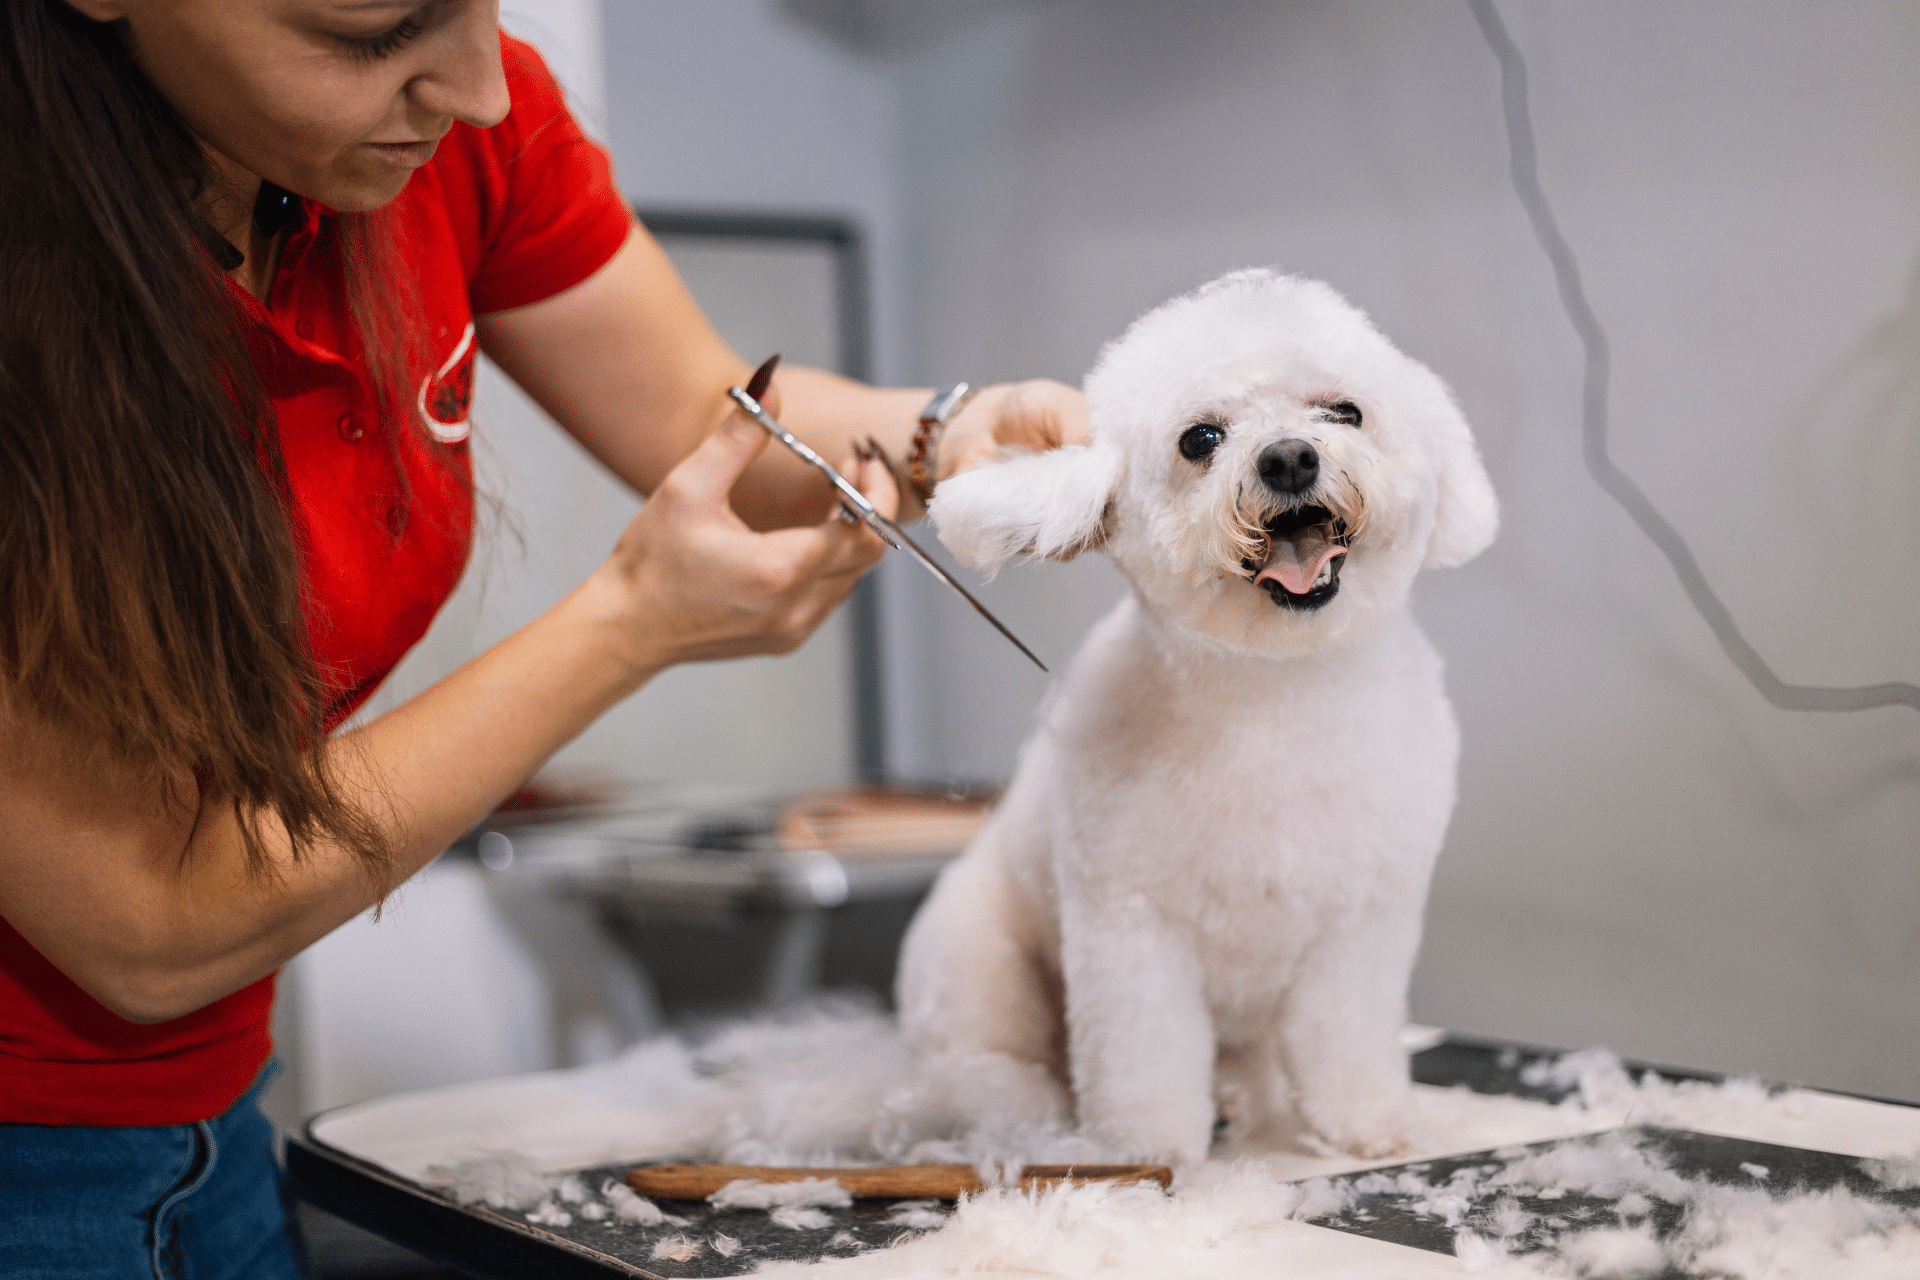 Can I start a dog grooming business from home: A small white dog sat on a grooming table having it's coat cut and smiling.